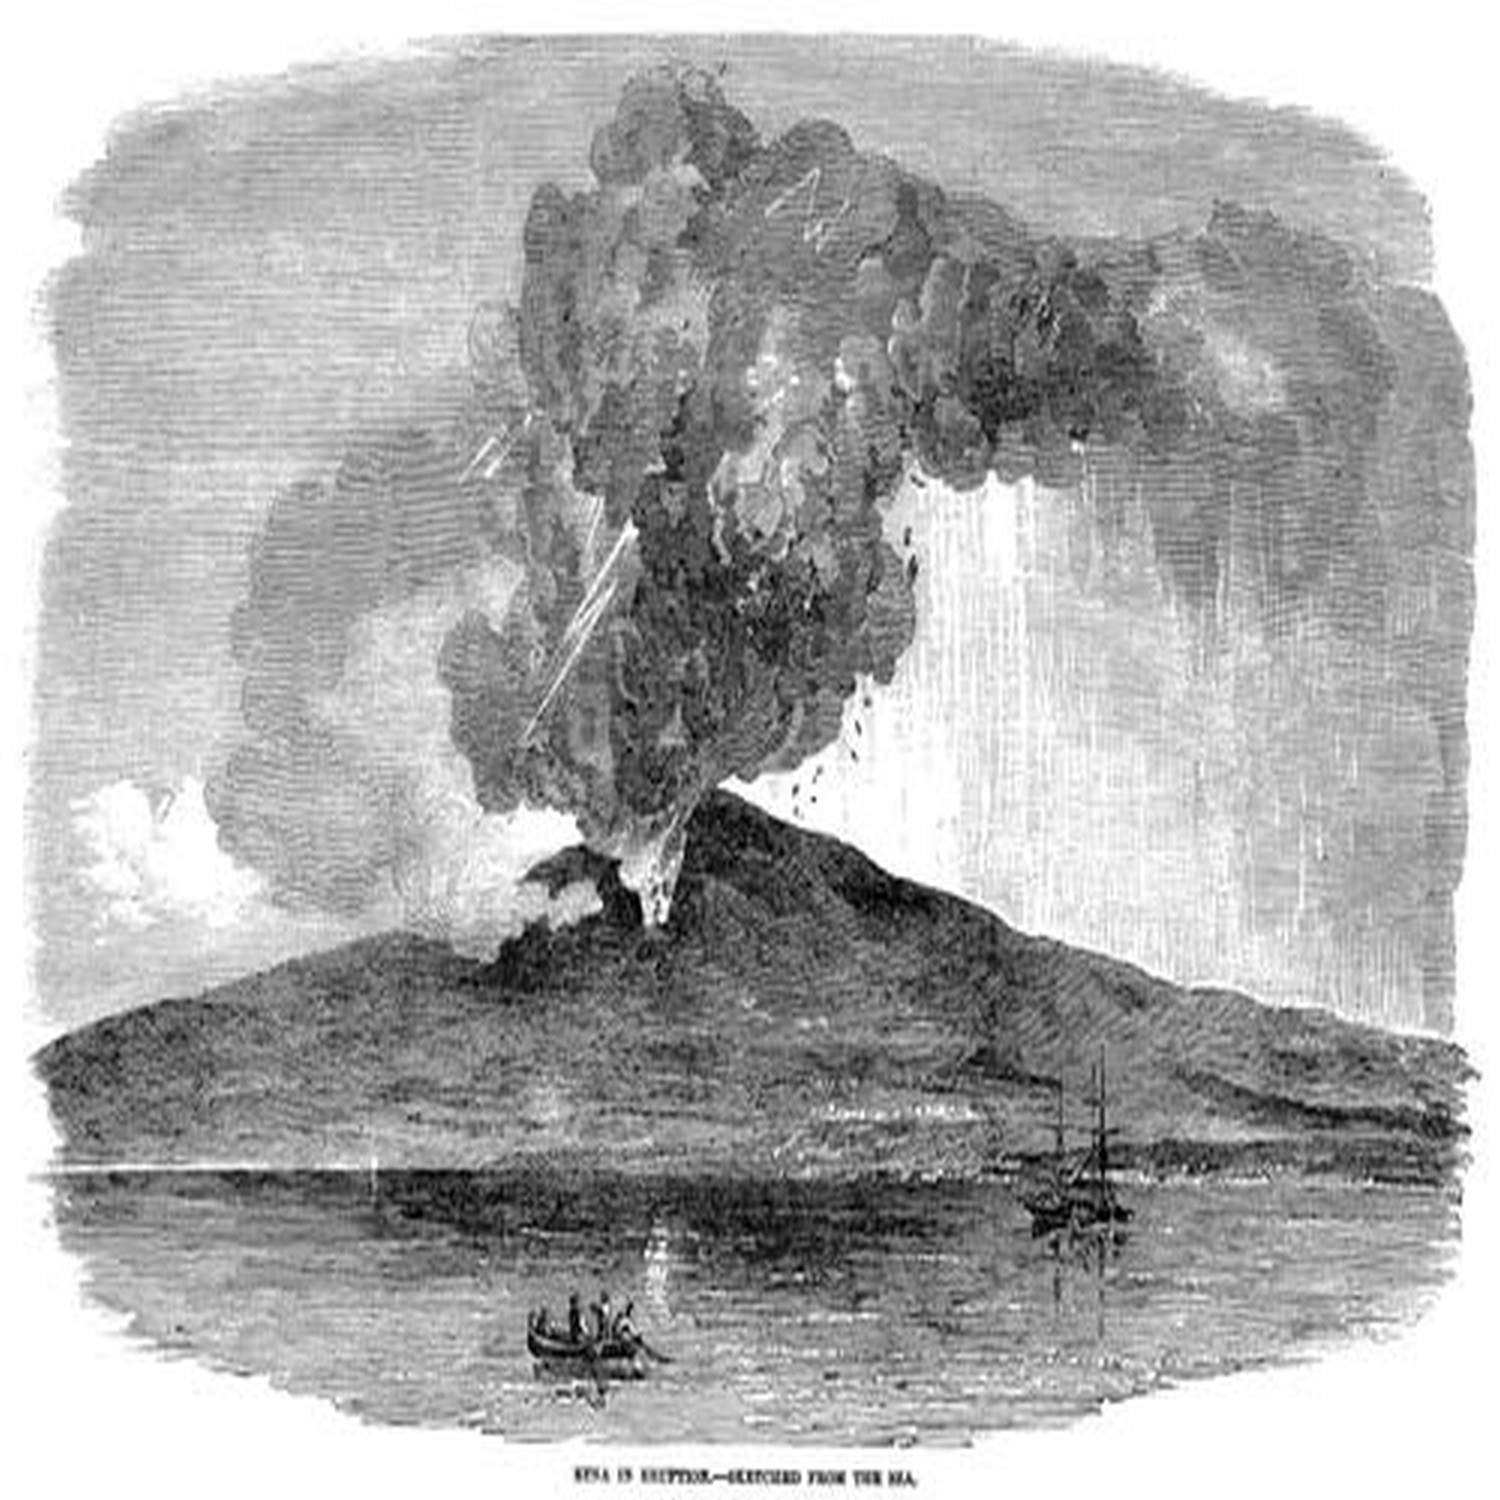 Amazon.com: Volcano Etna 1852 Netna In Eruption Sketched From The Sea Wood  Engraving 1852 Poster Print by (24 x 36): Posters & Prints